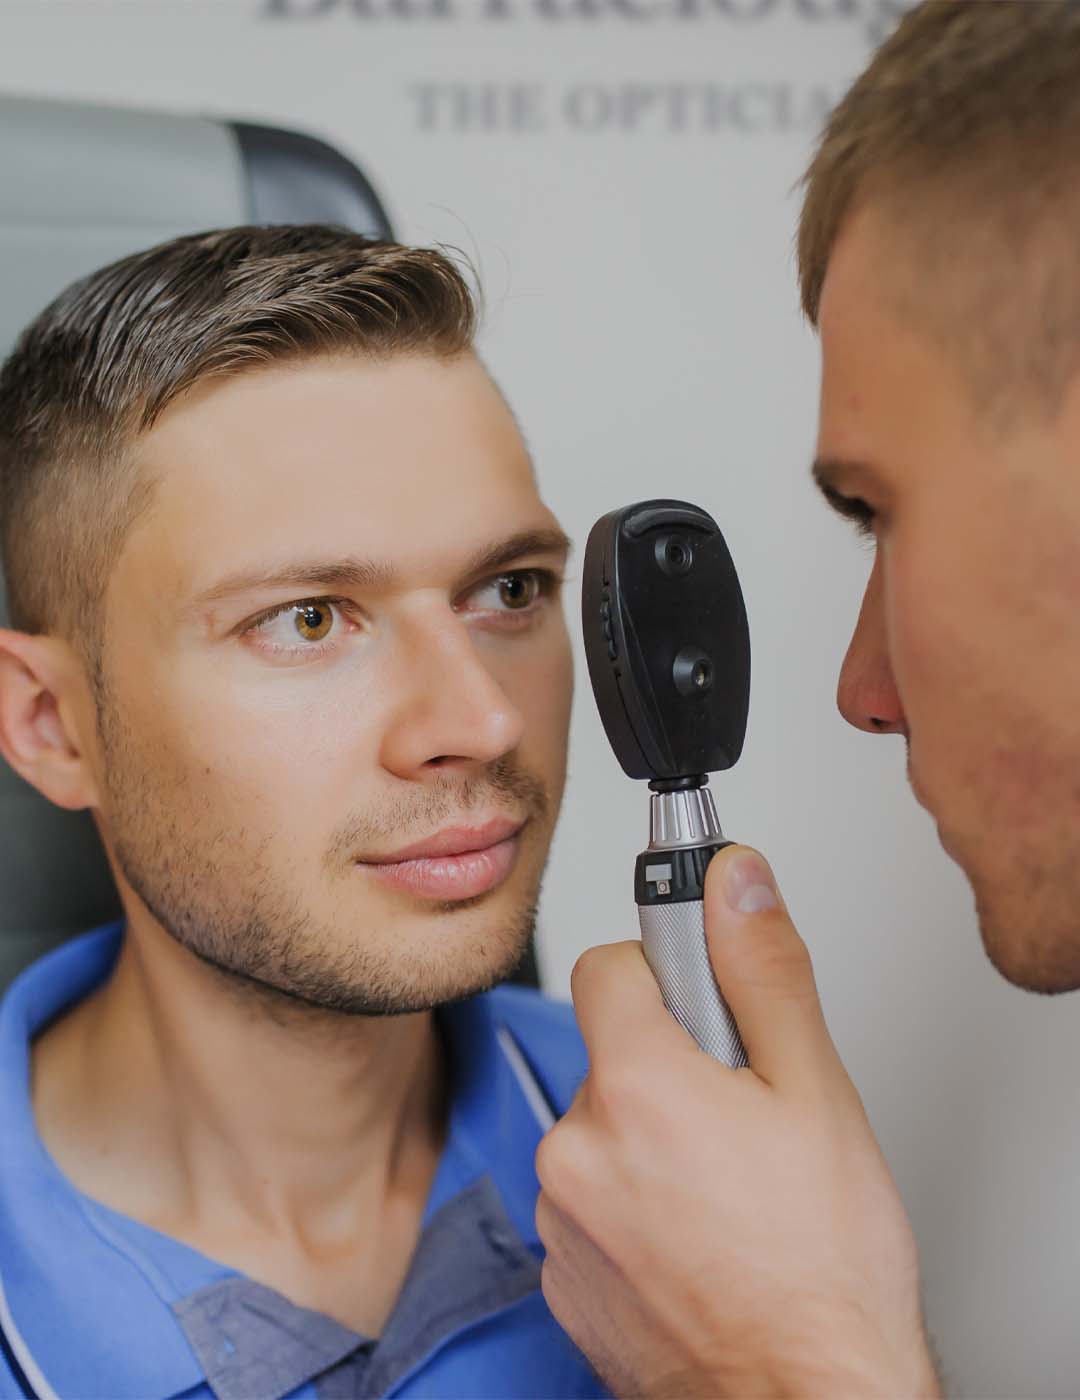 Example of a retinoscope being used